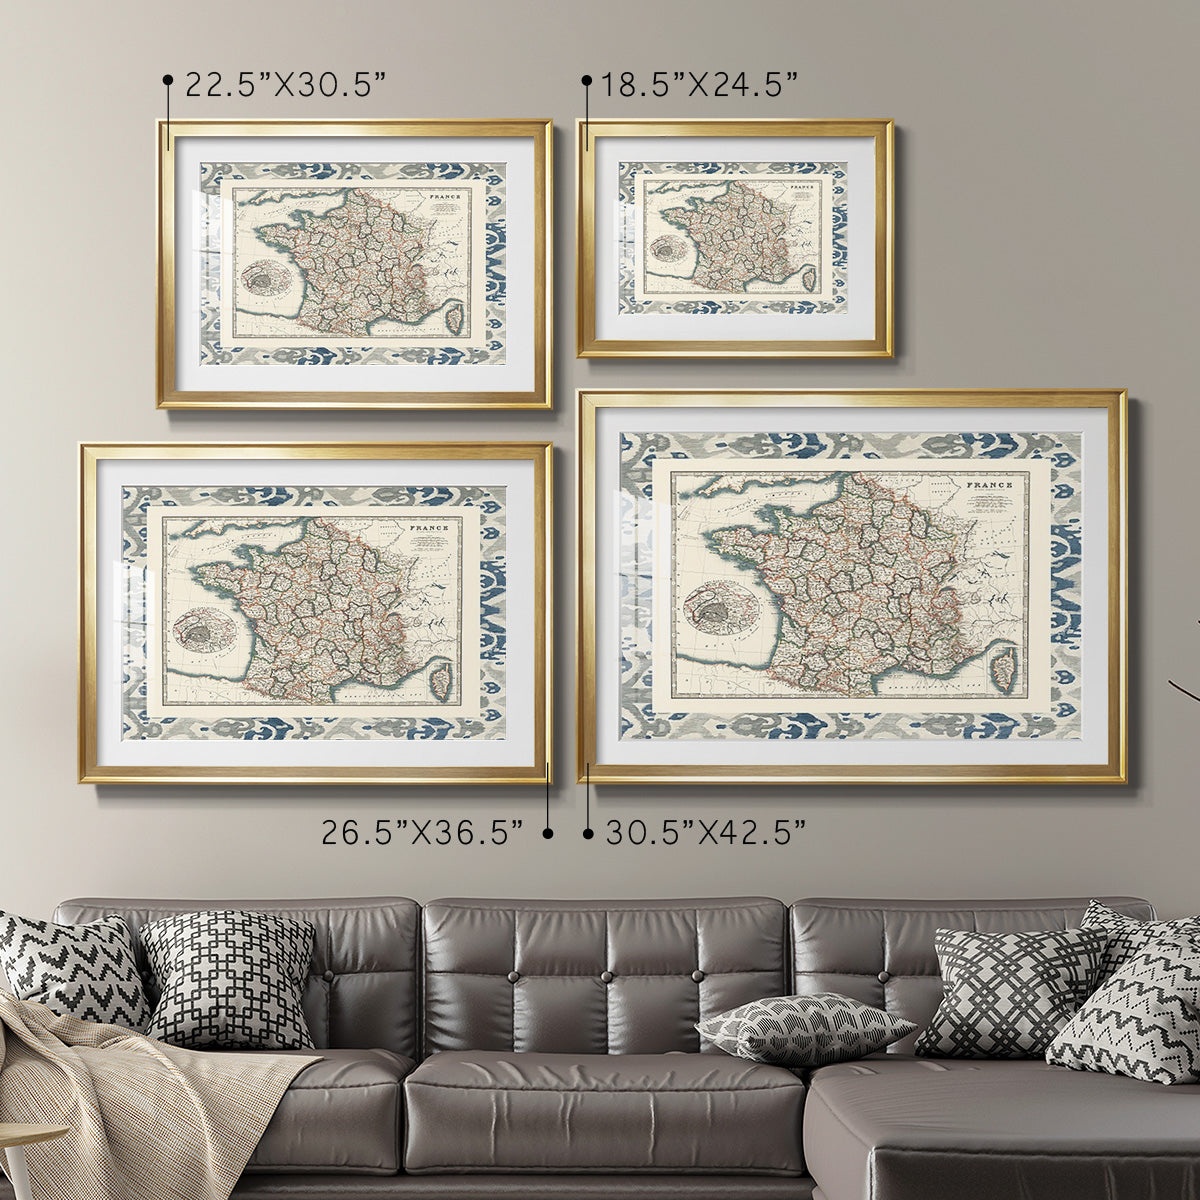 Bordered Map of France Premium Framed Print - Ready to Hang